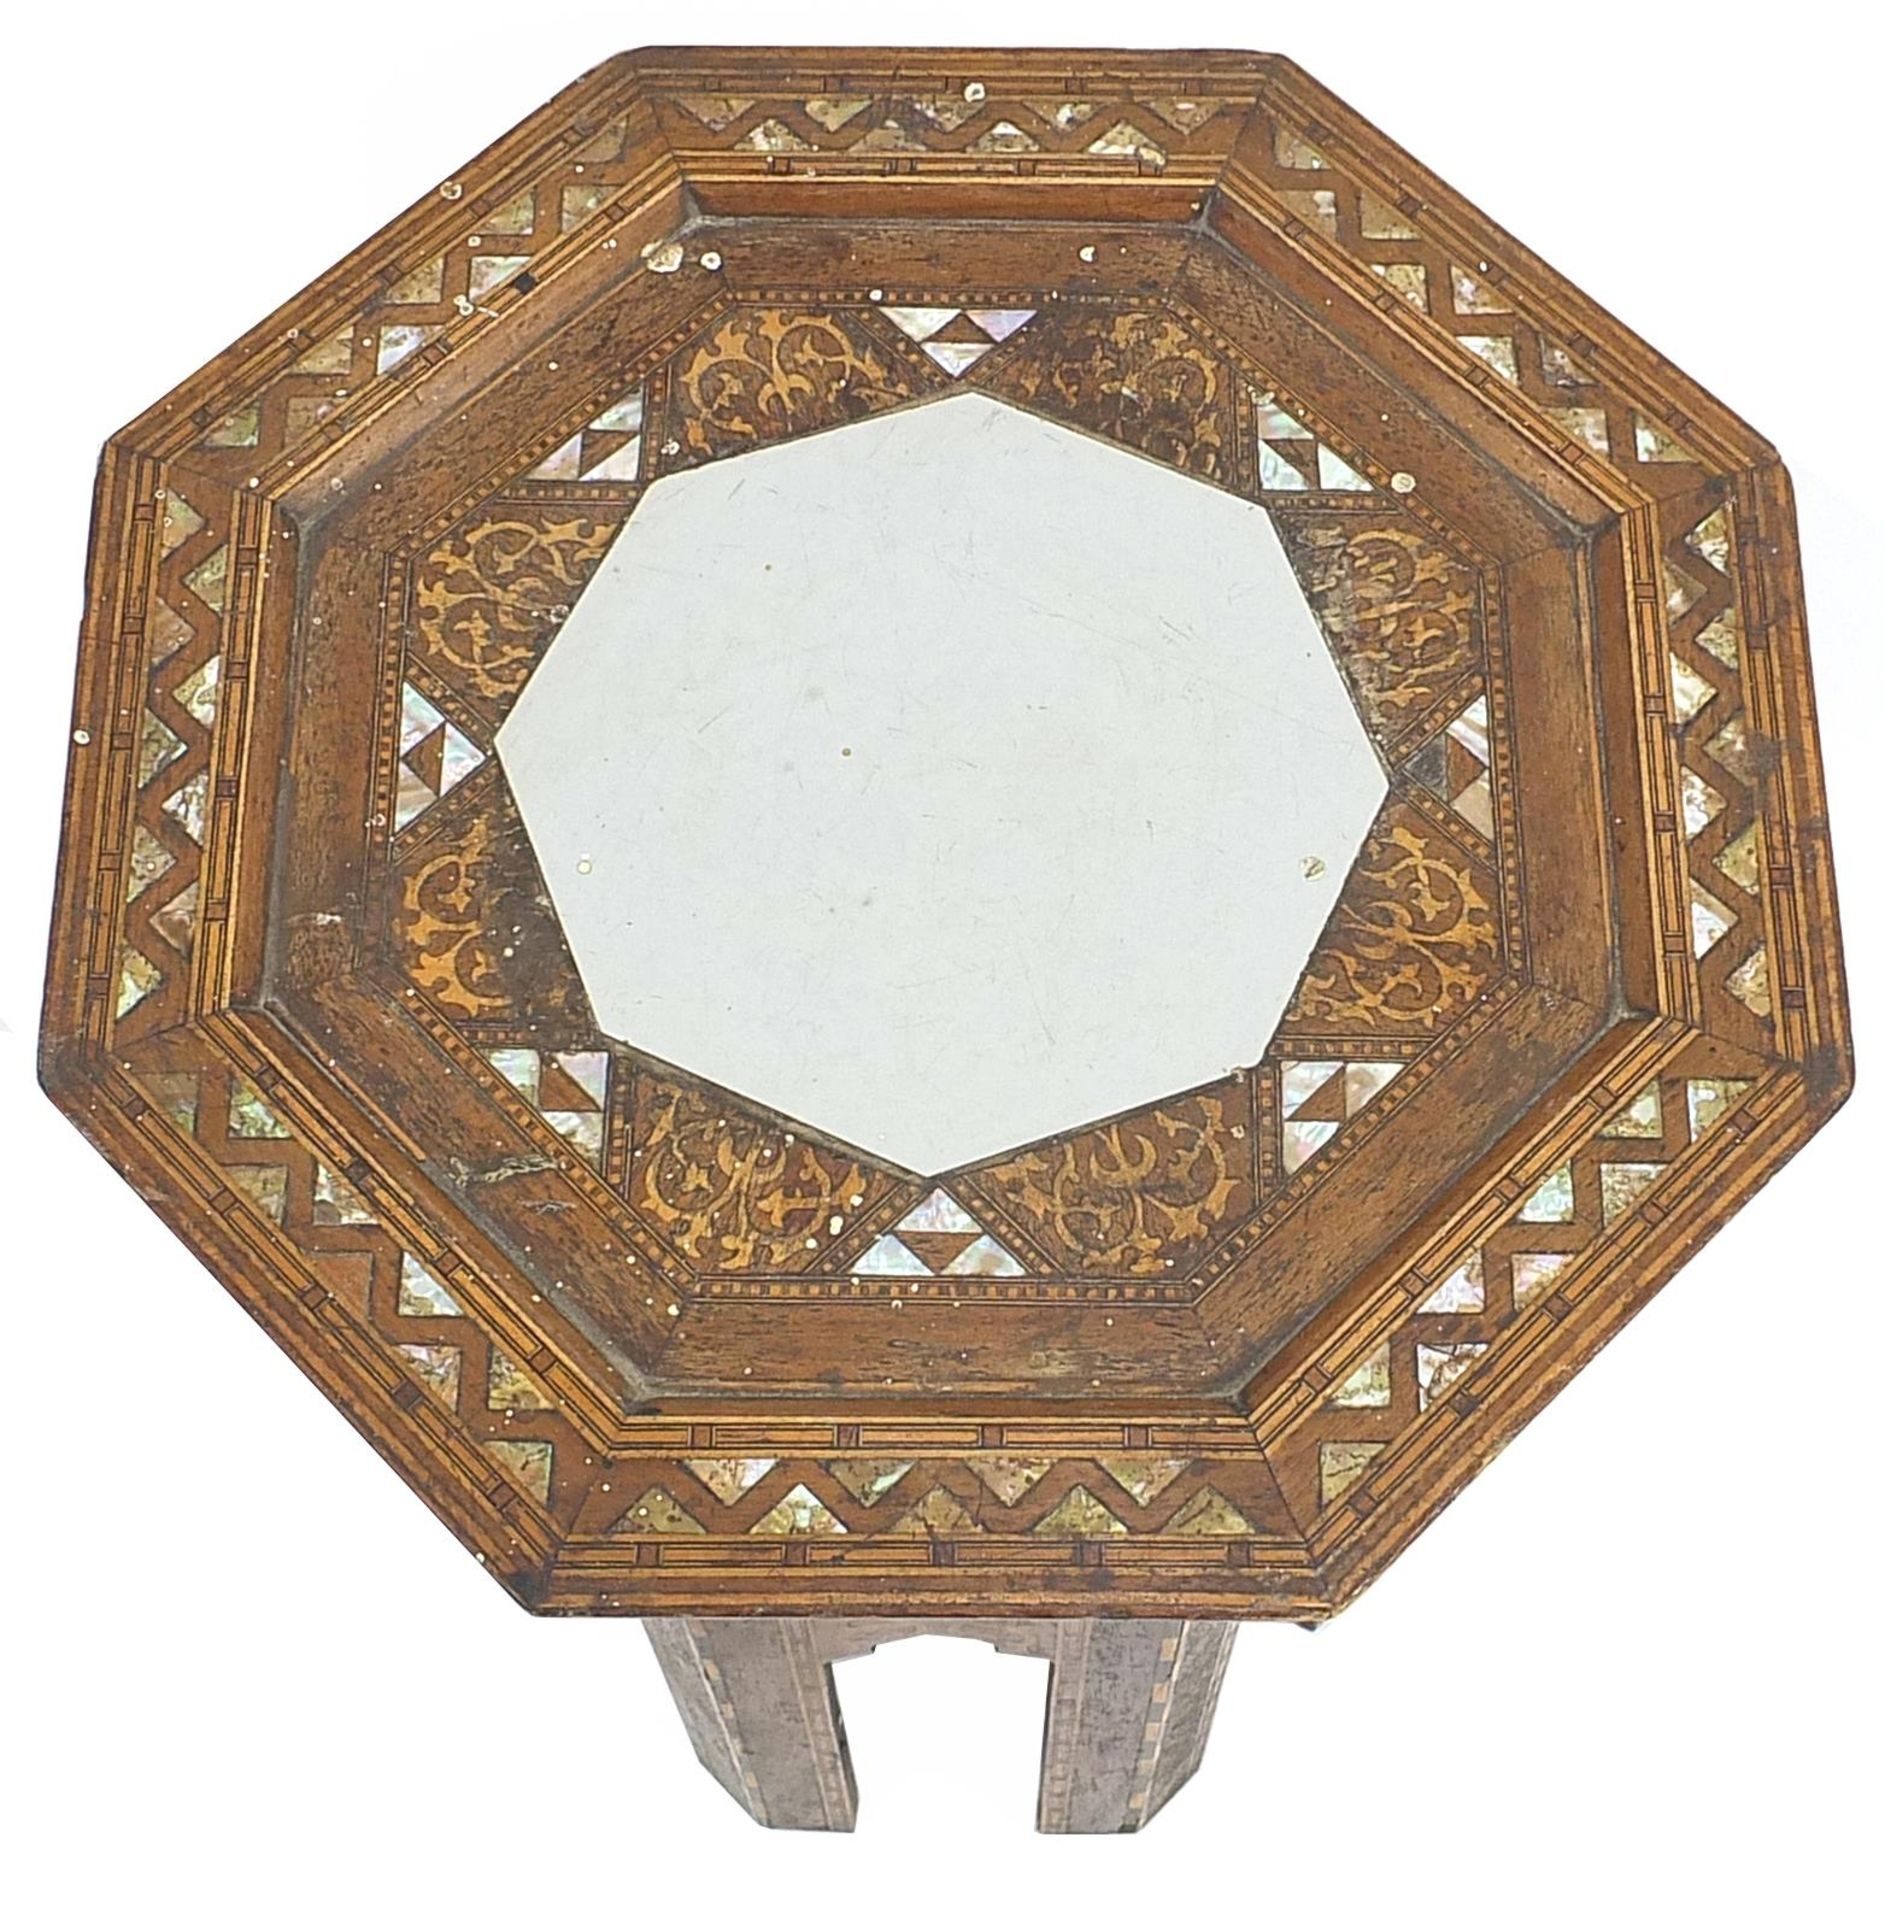 Manner of Liberty & Co, Moorish style inlaid octagonal side table with mother of pearl inlay, 62.5cm - Image 2 of 3